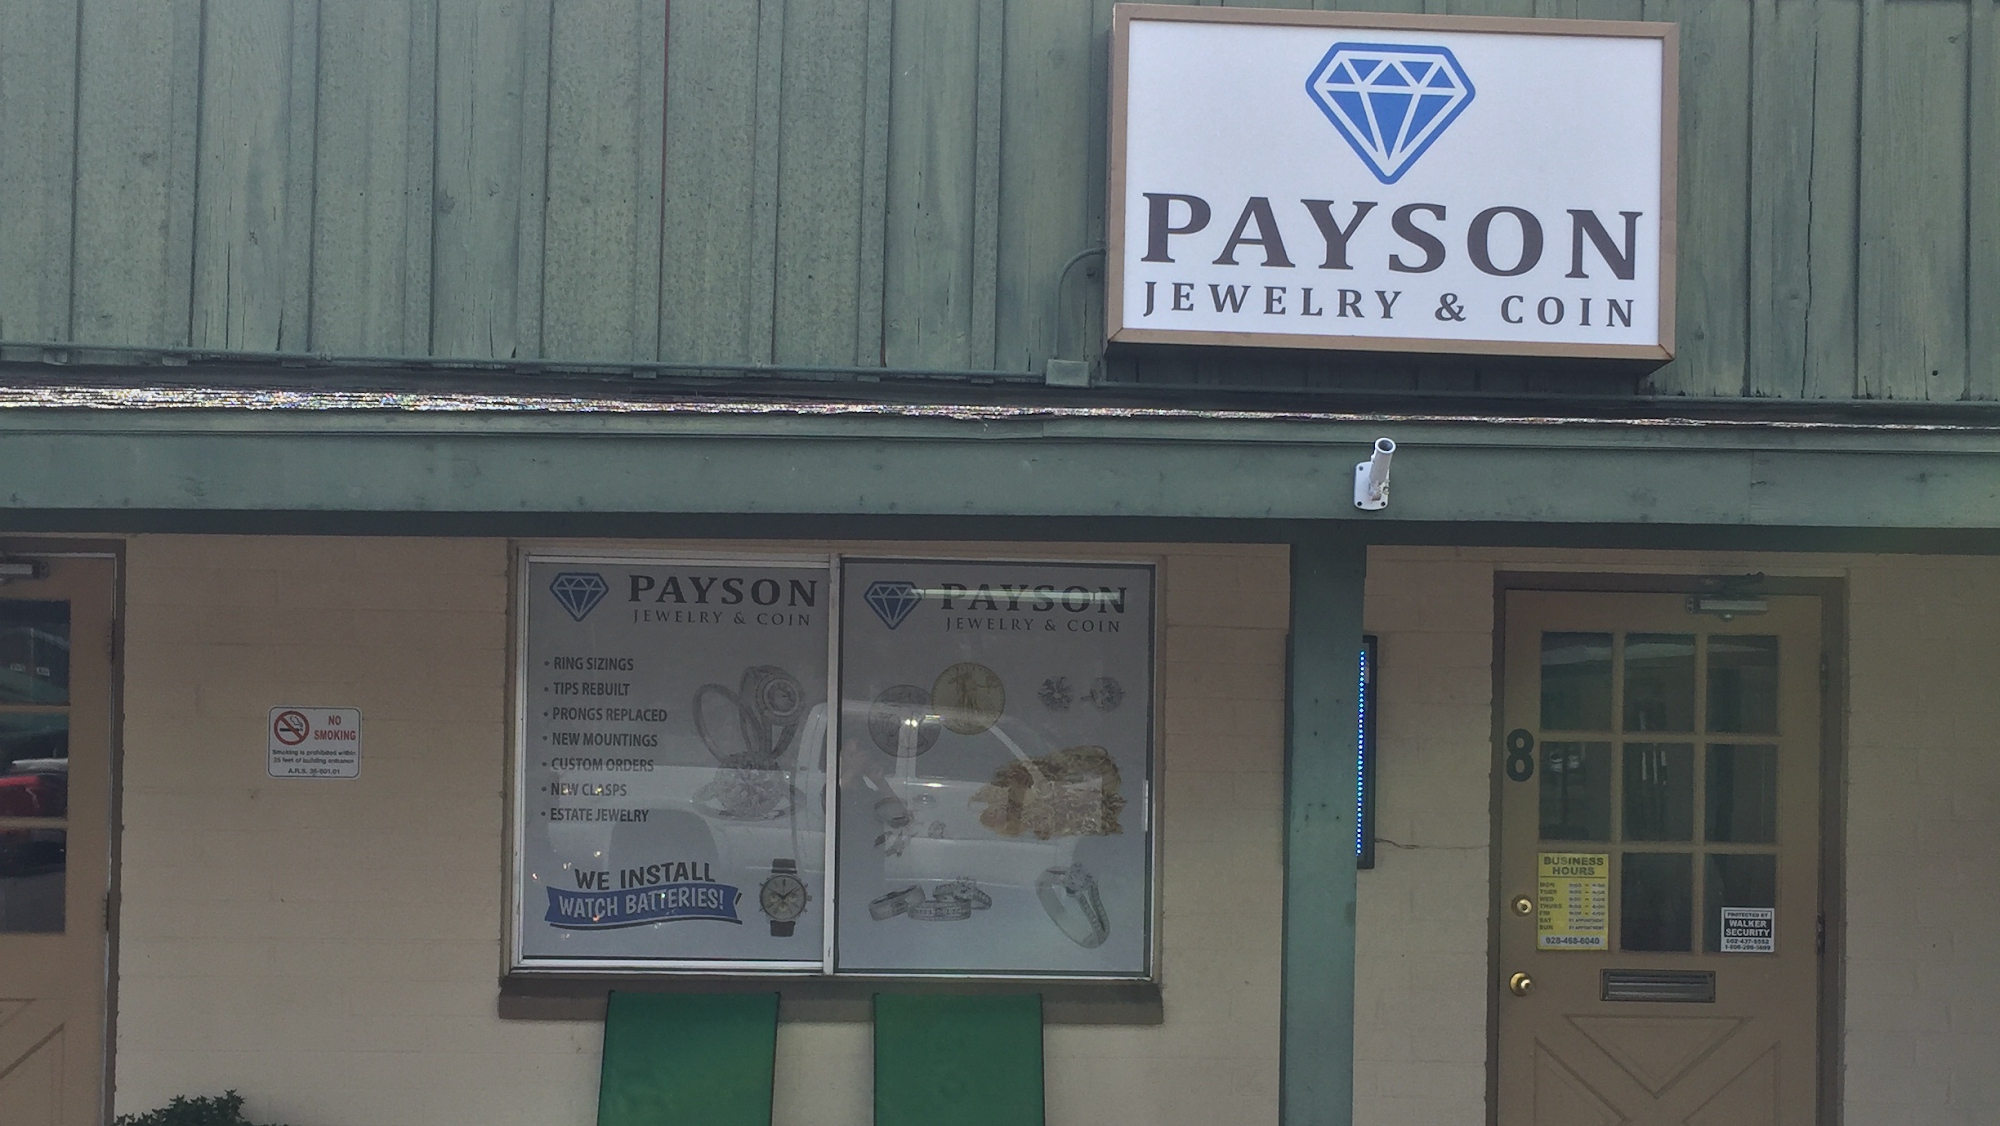 Payson Jewelry & Coin